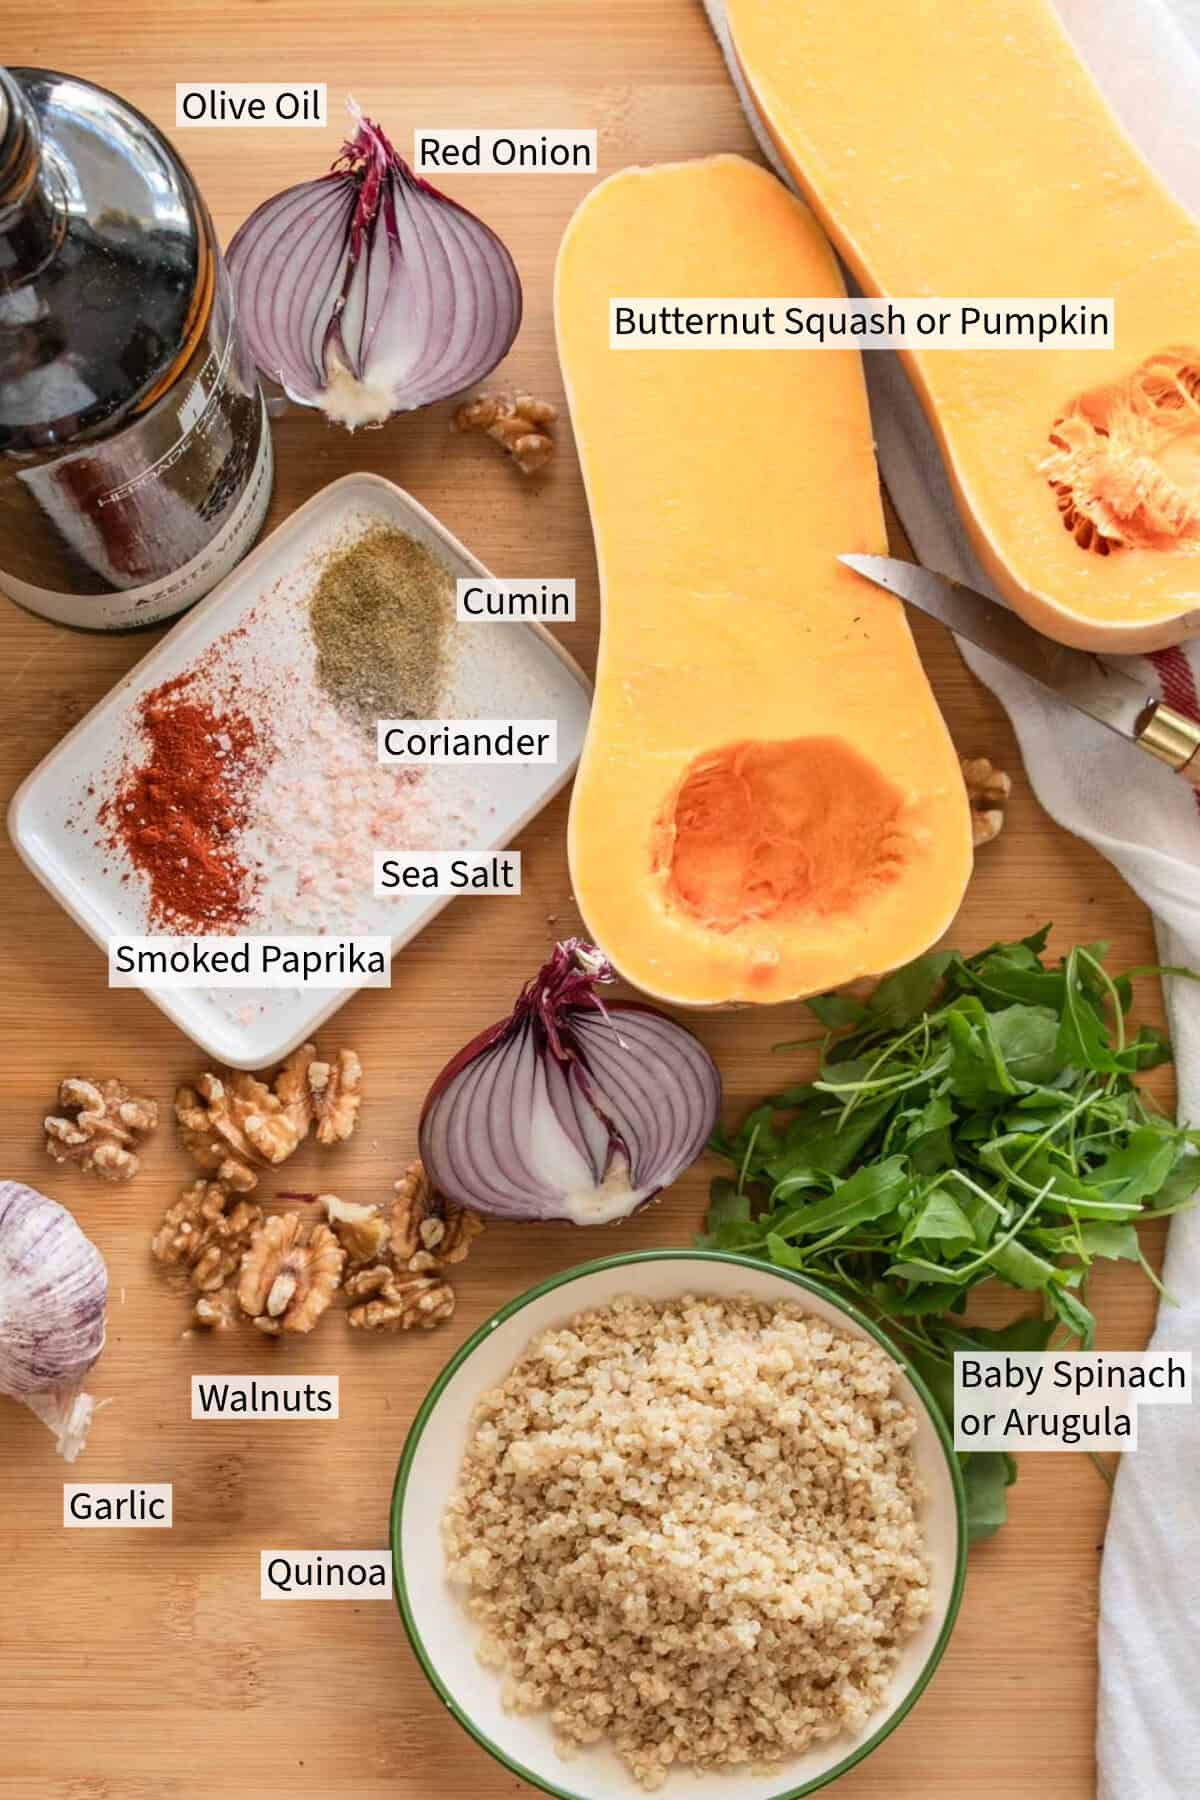 Top view of a cutting board with labeled ingredients for a pumkpin salad recipe.